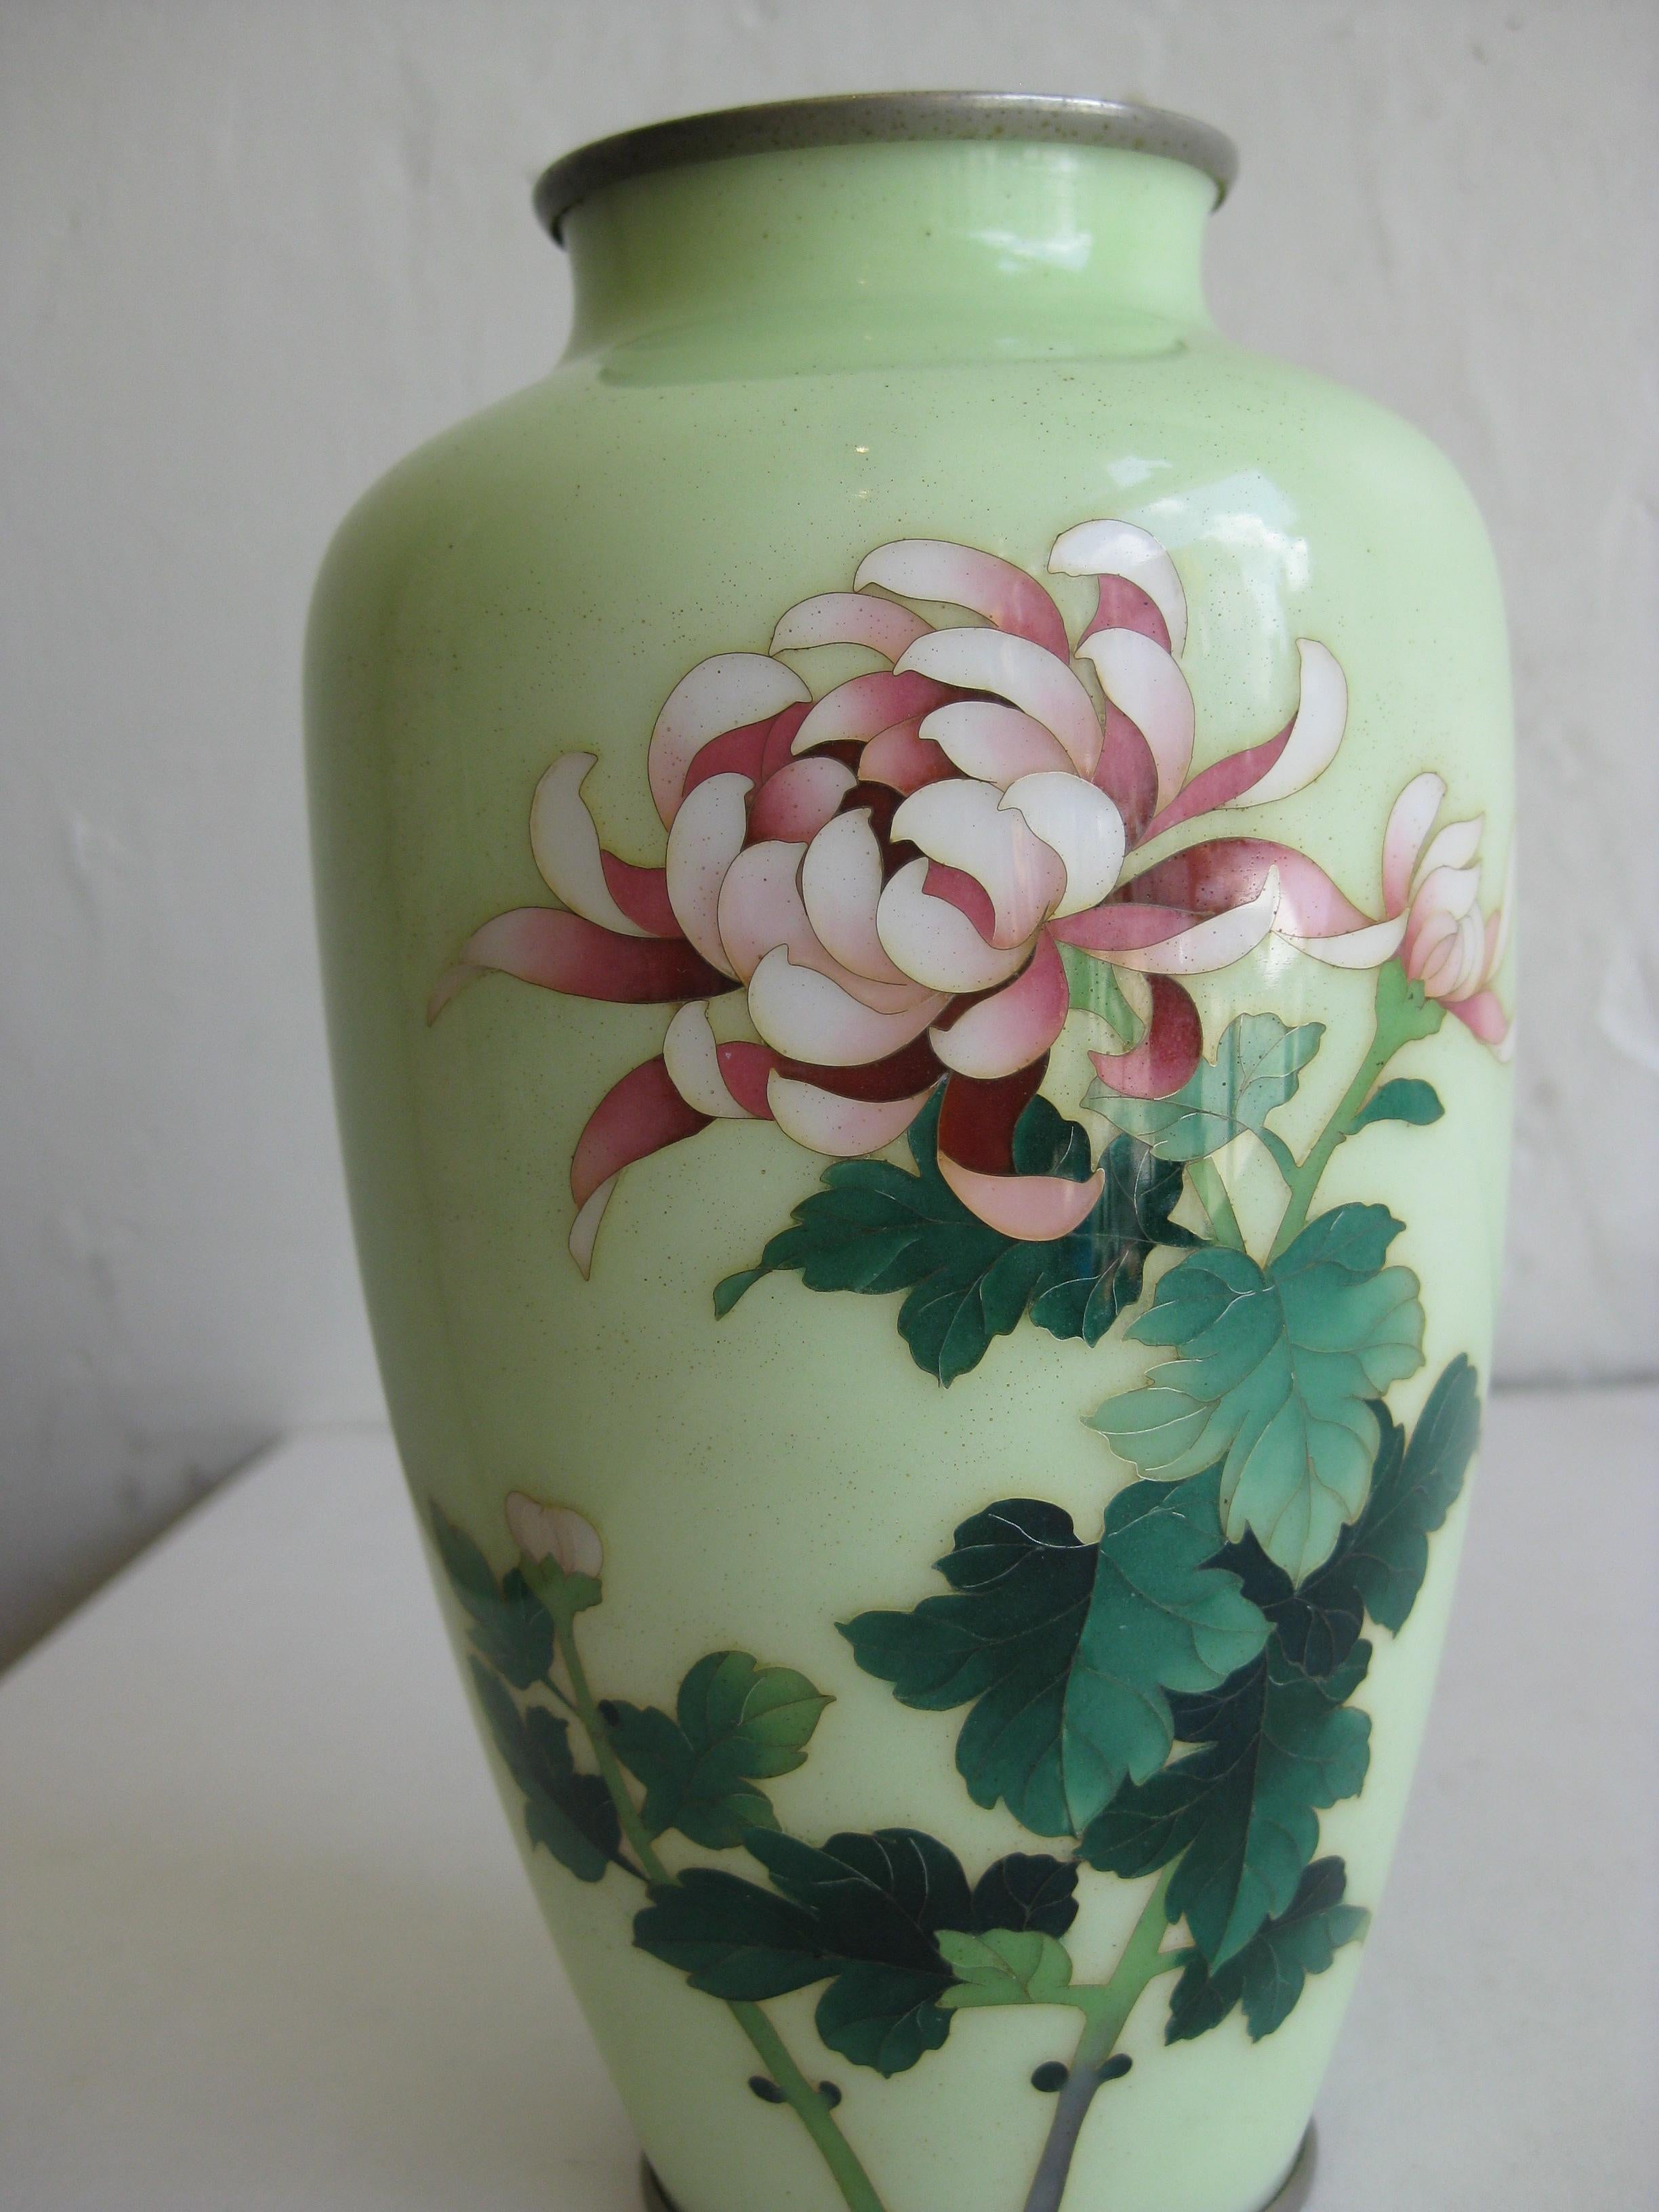 Fine antique Japanese Cloisonne enamel vase by master artist Ando Jubei. Dates from the early part of the 1900s. Beautiful colorful chrysanthemum flower with a pale green background. Silver color metal mounts. Signed with the artist mark on the